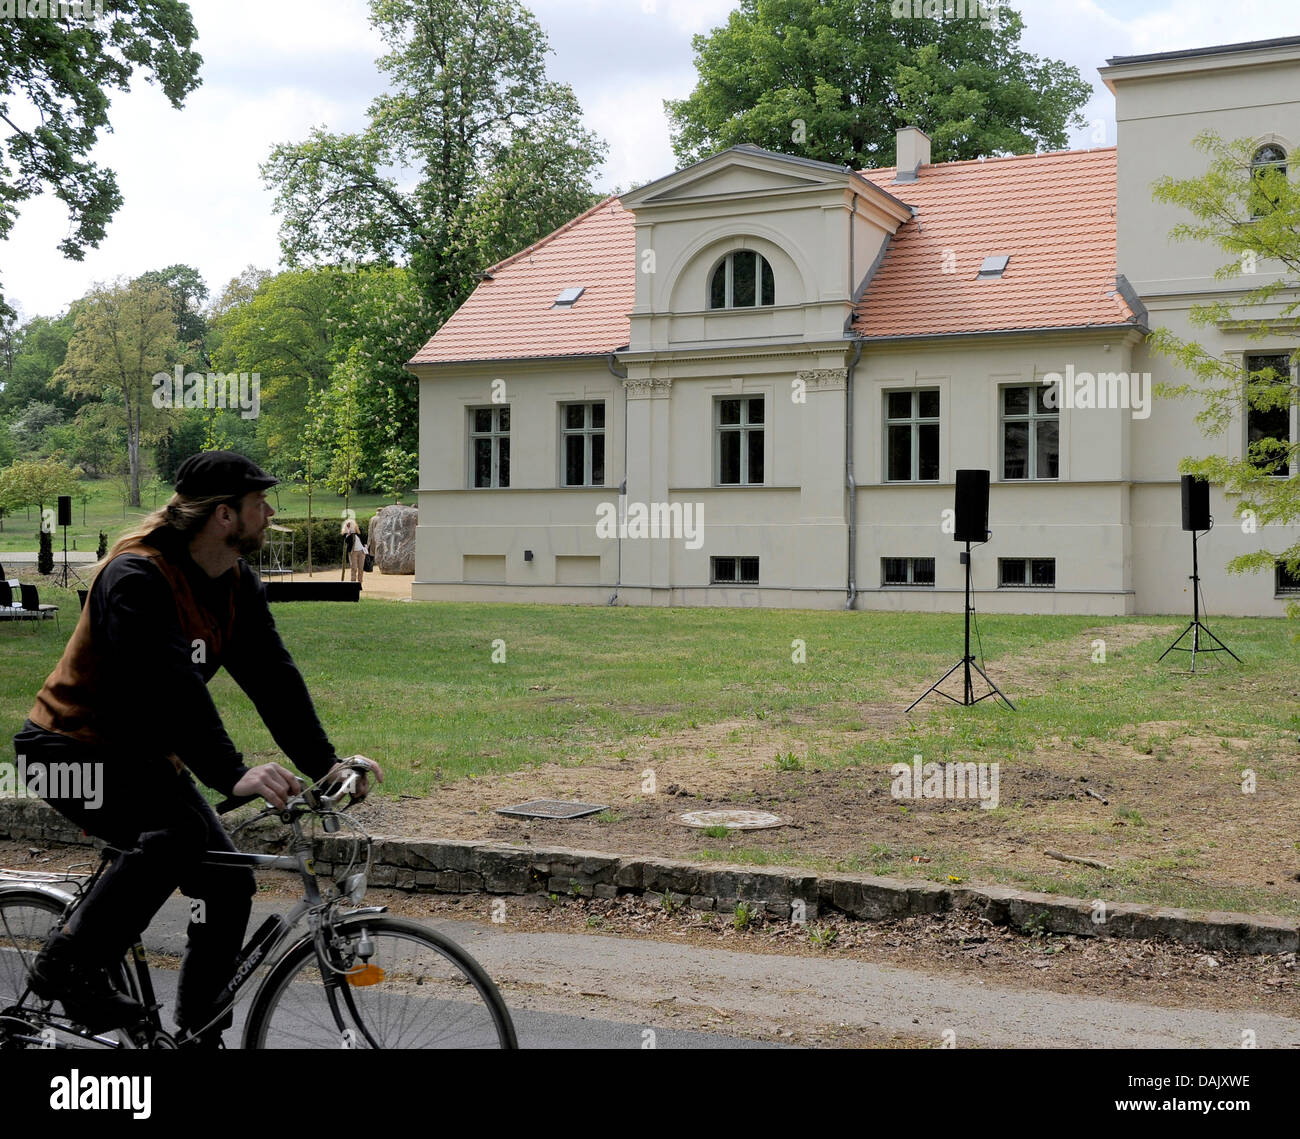 A cyclist rides past Lespsius Haus in Potsdam, Germany, 02 May 2011. In the research and meeting center, there is an exhibition about the work of theologist and orientalist Johannes Lepsius (1858-1926), who campaigned heavily for persecuted Armenians. There have been protest from Turkey against the memorial. Photo: BERND SETTNIK Stock Photo